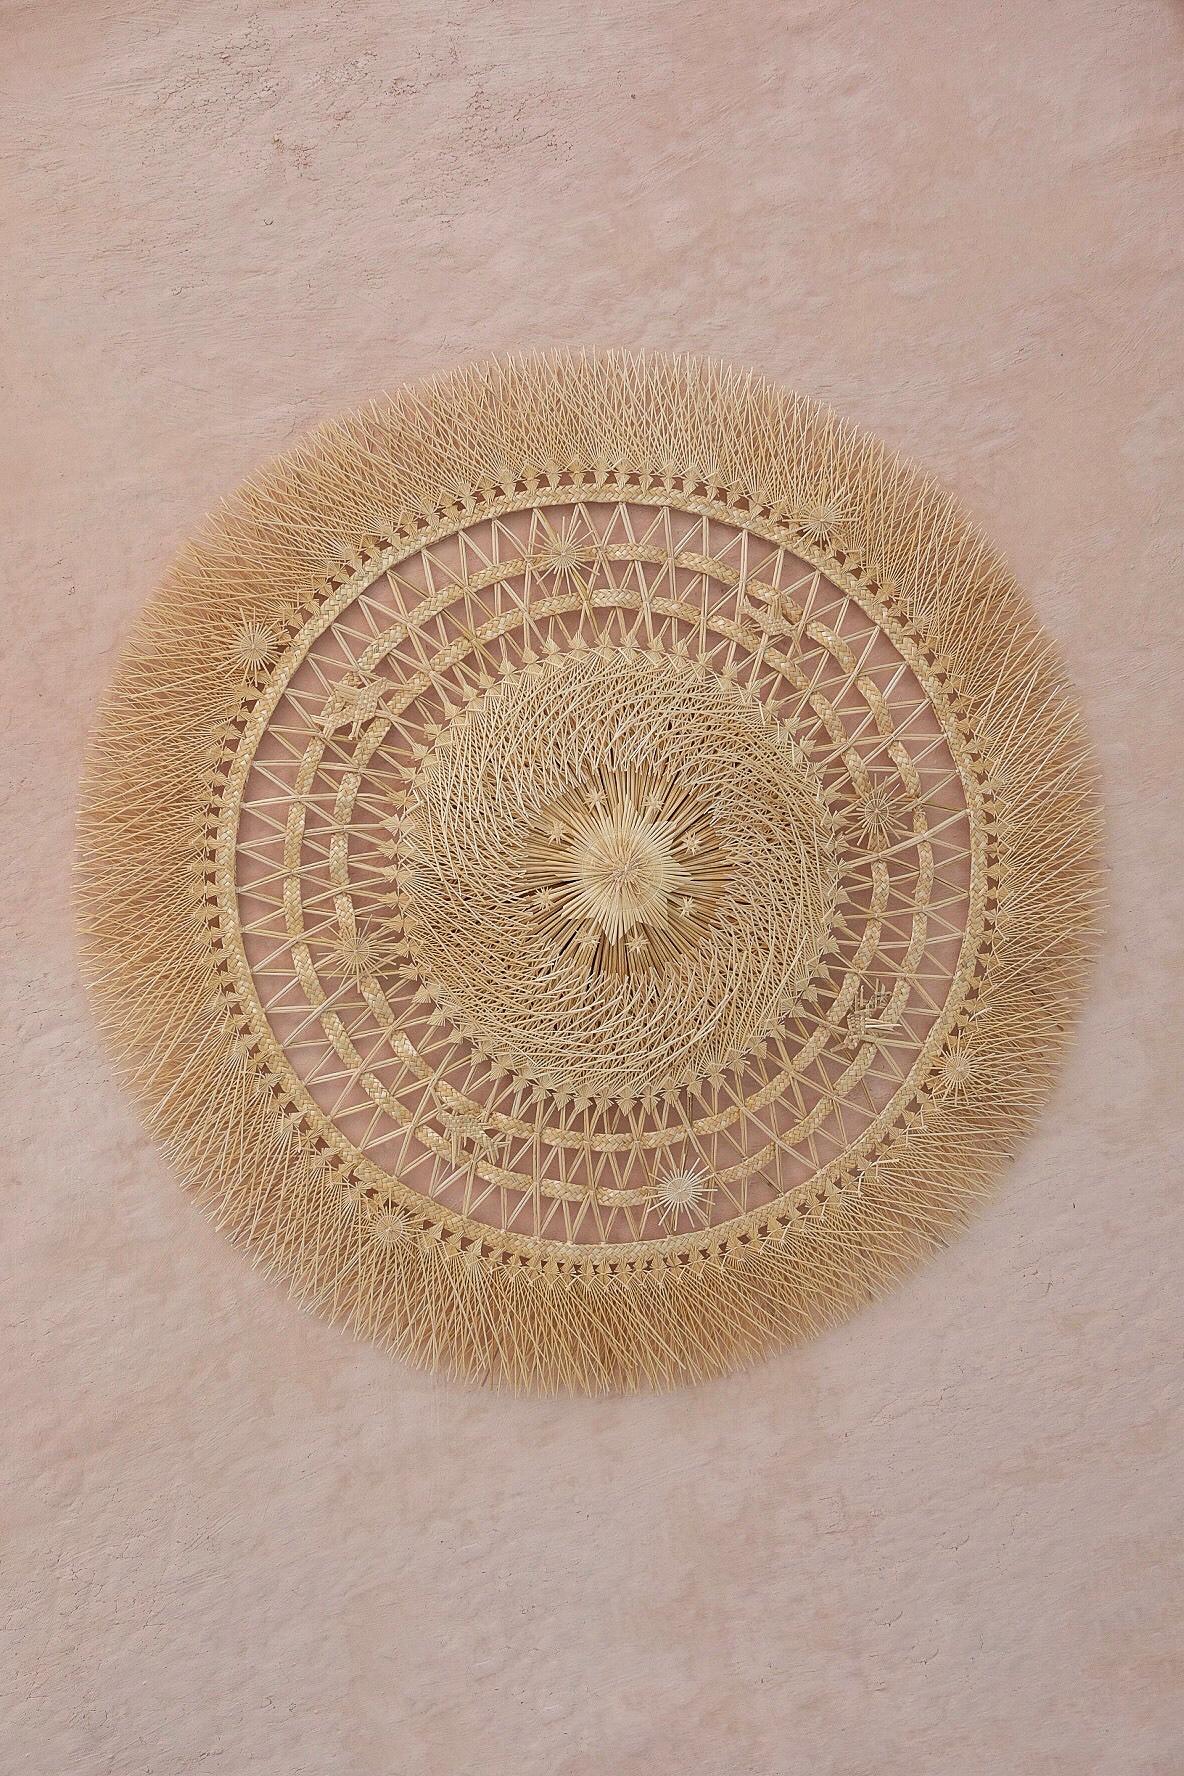 Cornelio Star by Onora
Dimensions: D 50 cm
Materials: Woven wheat fiber

Hand woven by the Tata Curiata workshop, master artisans who received a special mention in the Loewe Craft Prize of 2017 edition. Several hundred strands of wheat fibre are